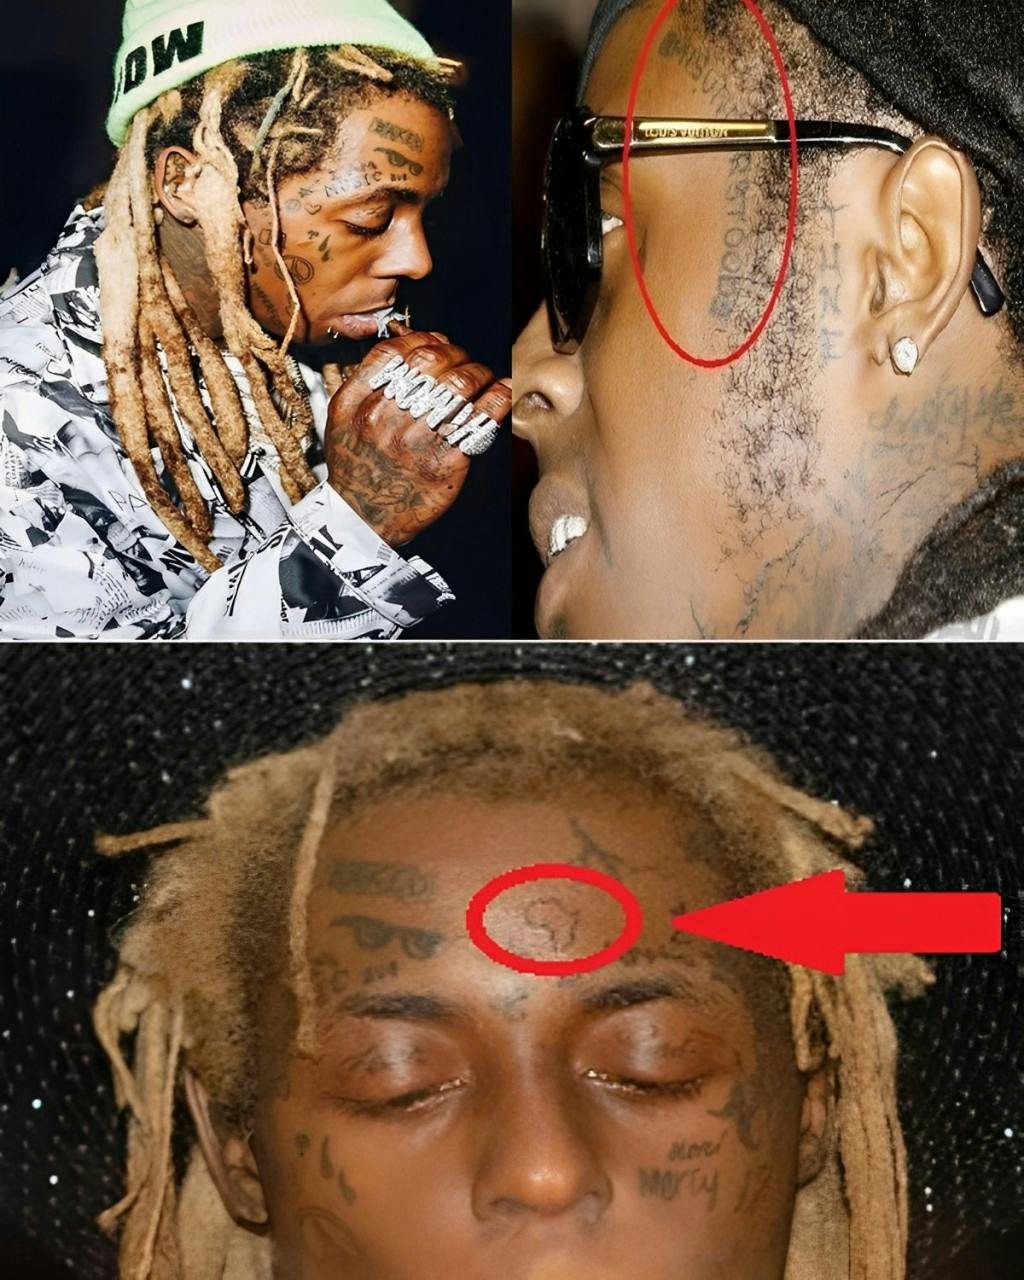 Cover Image for The meaning of Lil Wayne’s face tattoos has the effect of inspiring many people about both music passion and life ideals